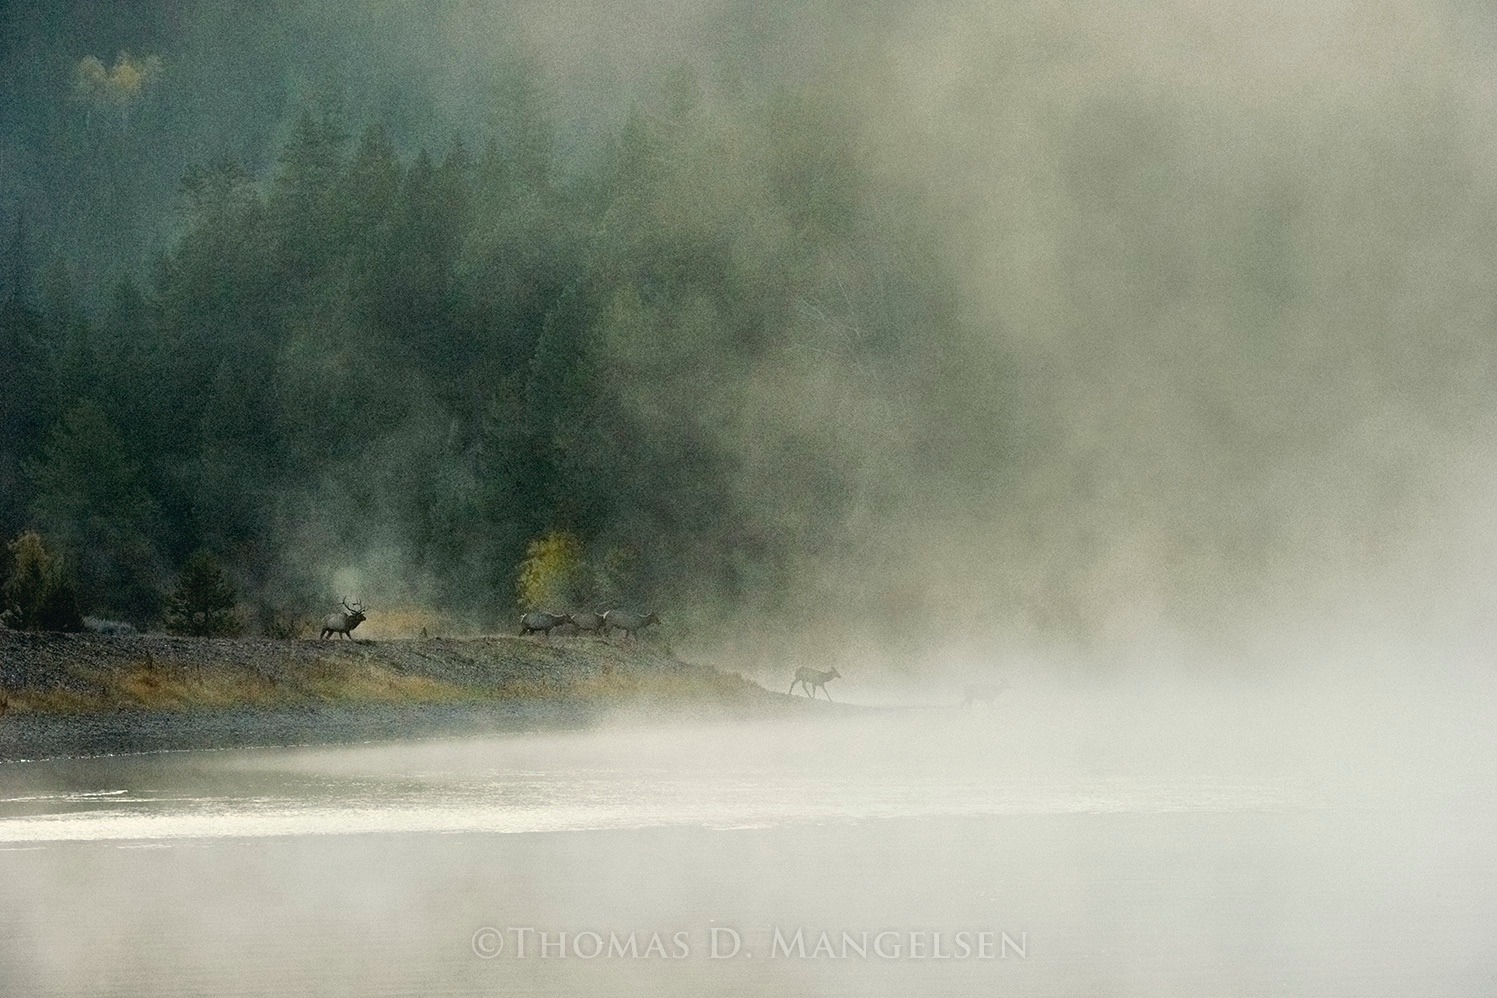 In &quot;Snake River Crossing,&quot; a herd of elk uses a veil of fog as cover to discreetly cross the Snake River in Grand Teton National Park.  Photograph courtesy Thomas D. Mangelsen